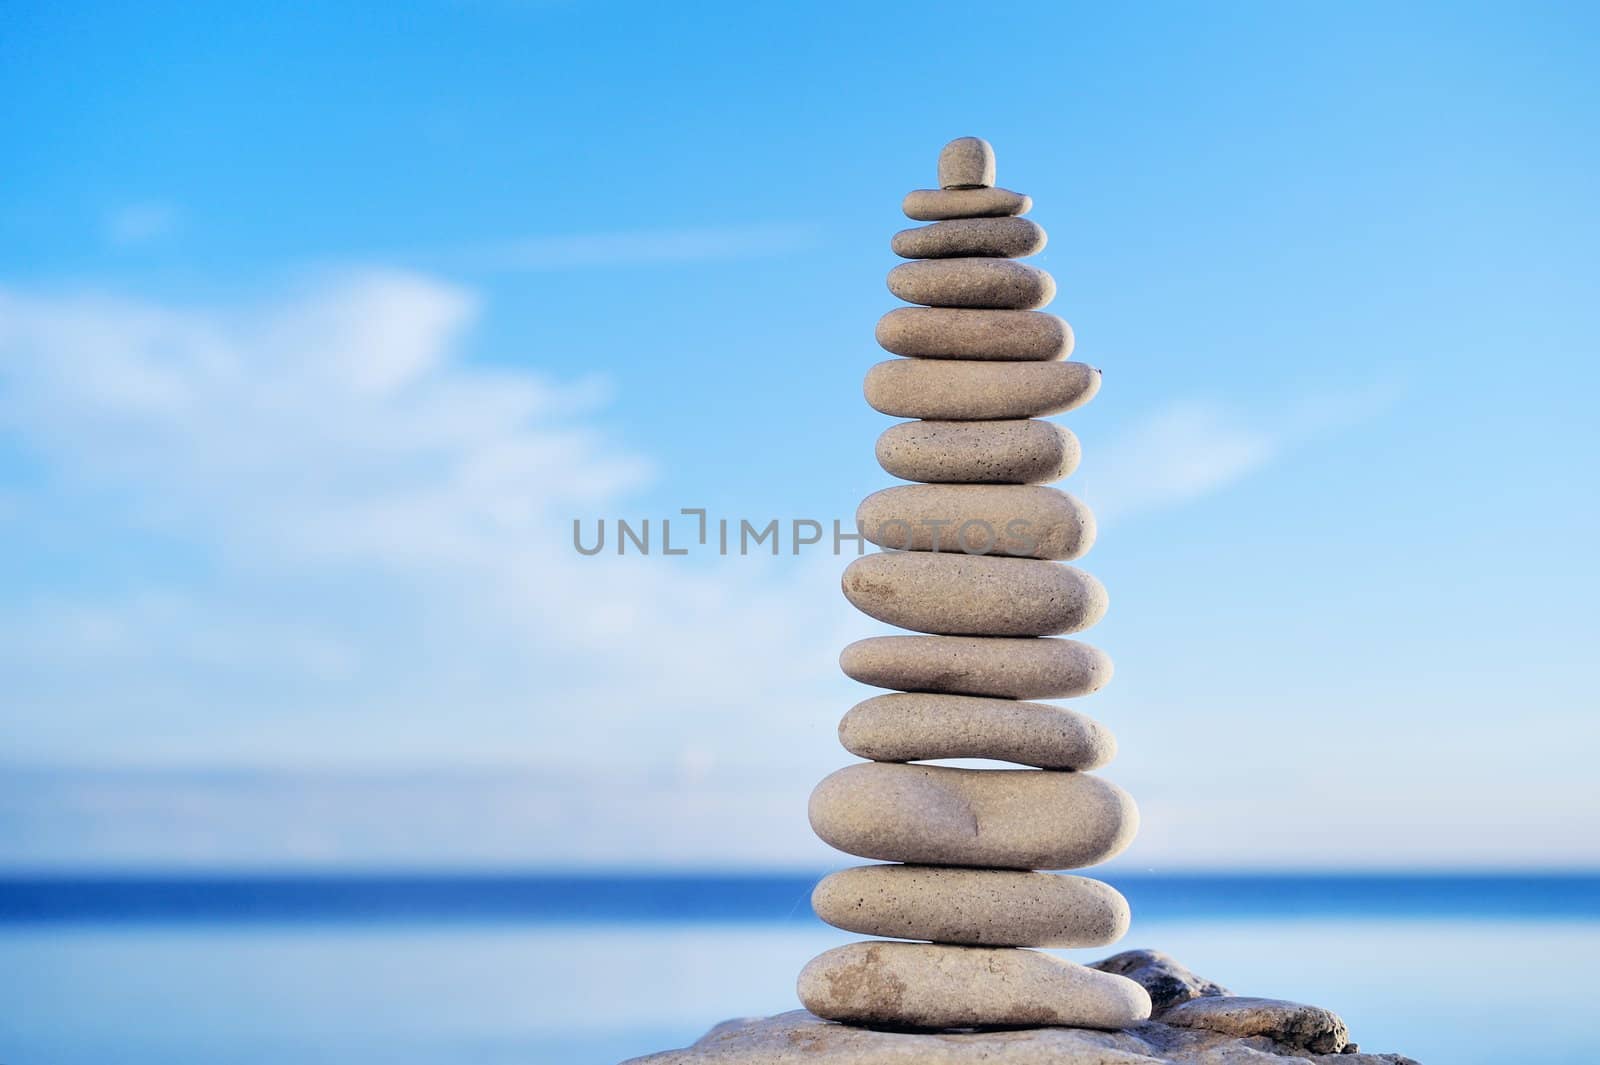 Balancing white pebbles each other on a sky background